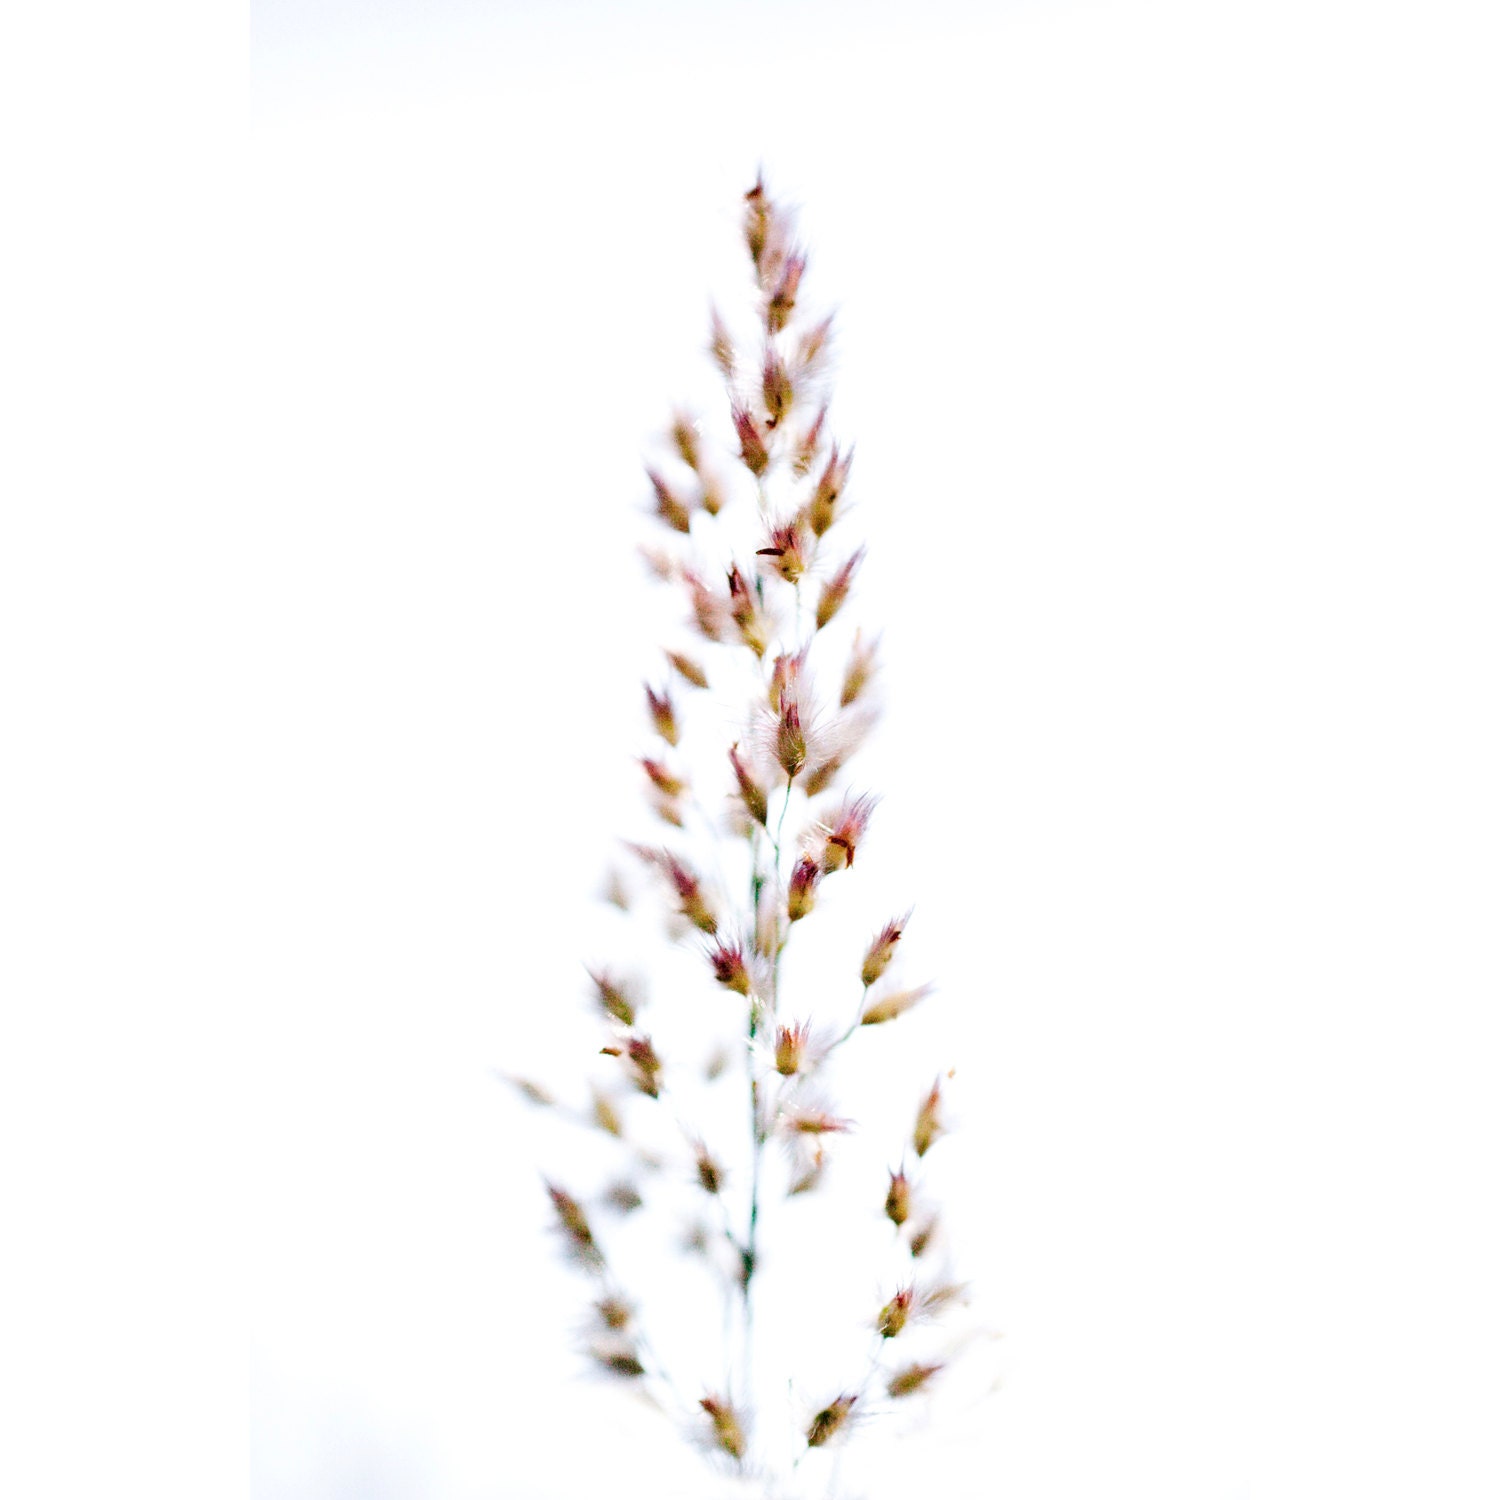 Photography Christmas Tree Grass Seed Minimal Holiday Decor White Pastel Country Simple Natural Clean Home Cottage